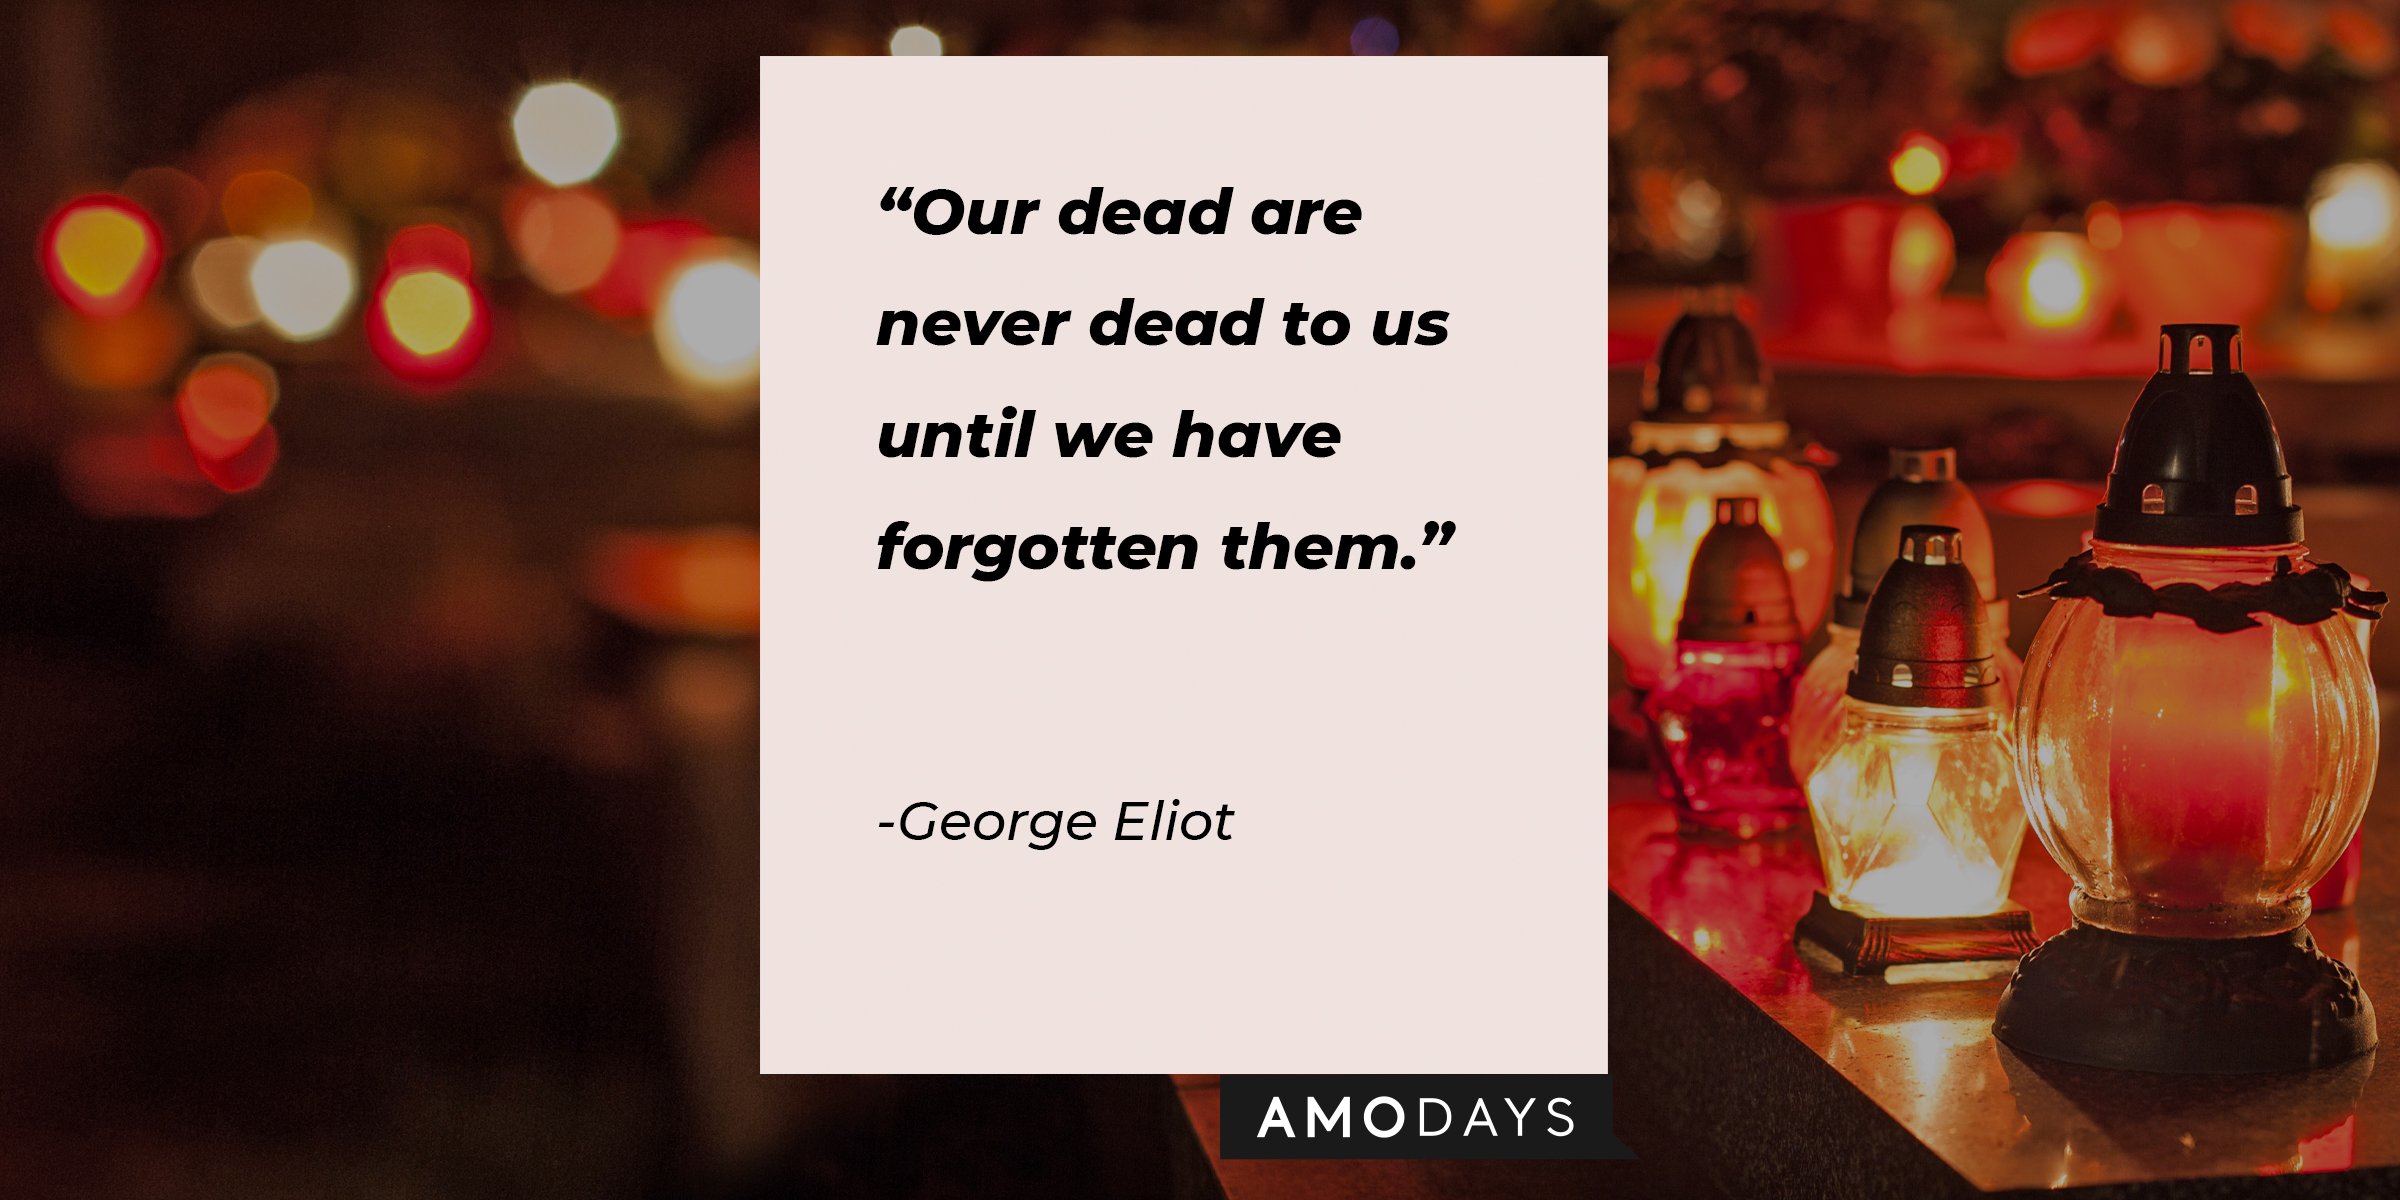 Shutterstock| A picture of candles in the back with a quote by  George Eliot: ""Our dead are never dead to us until we have forgotten them."